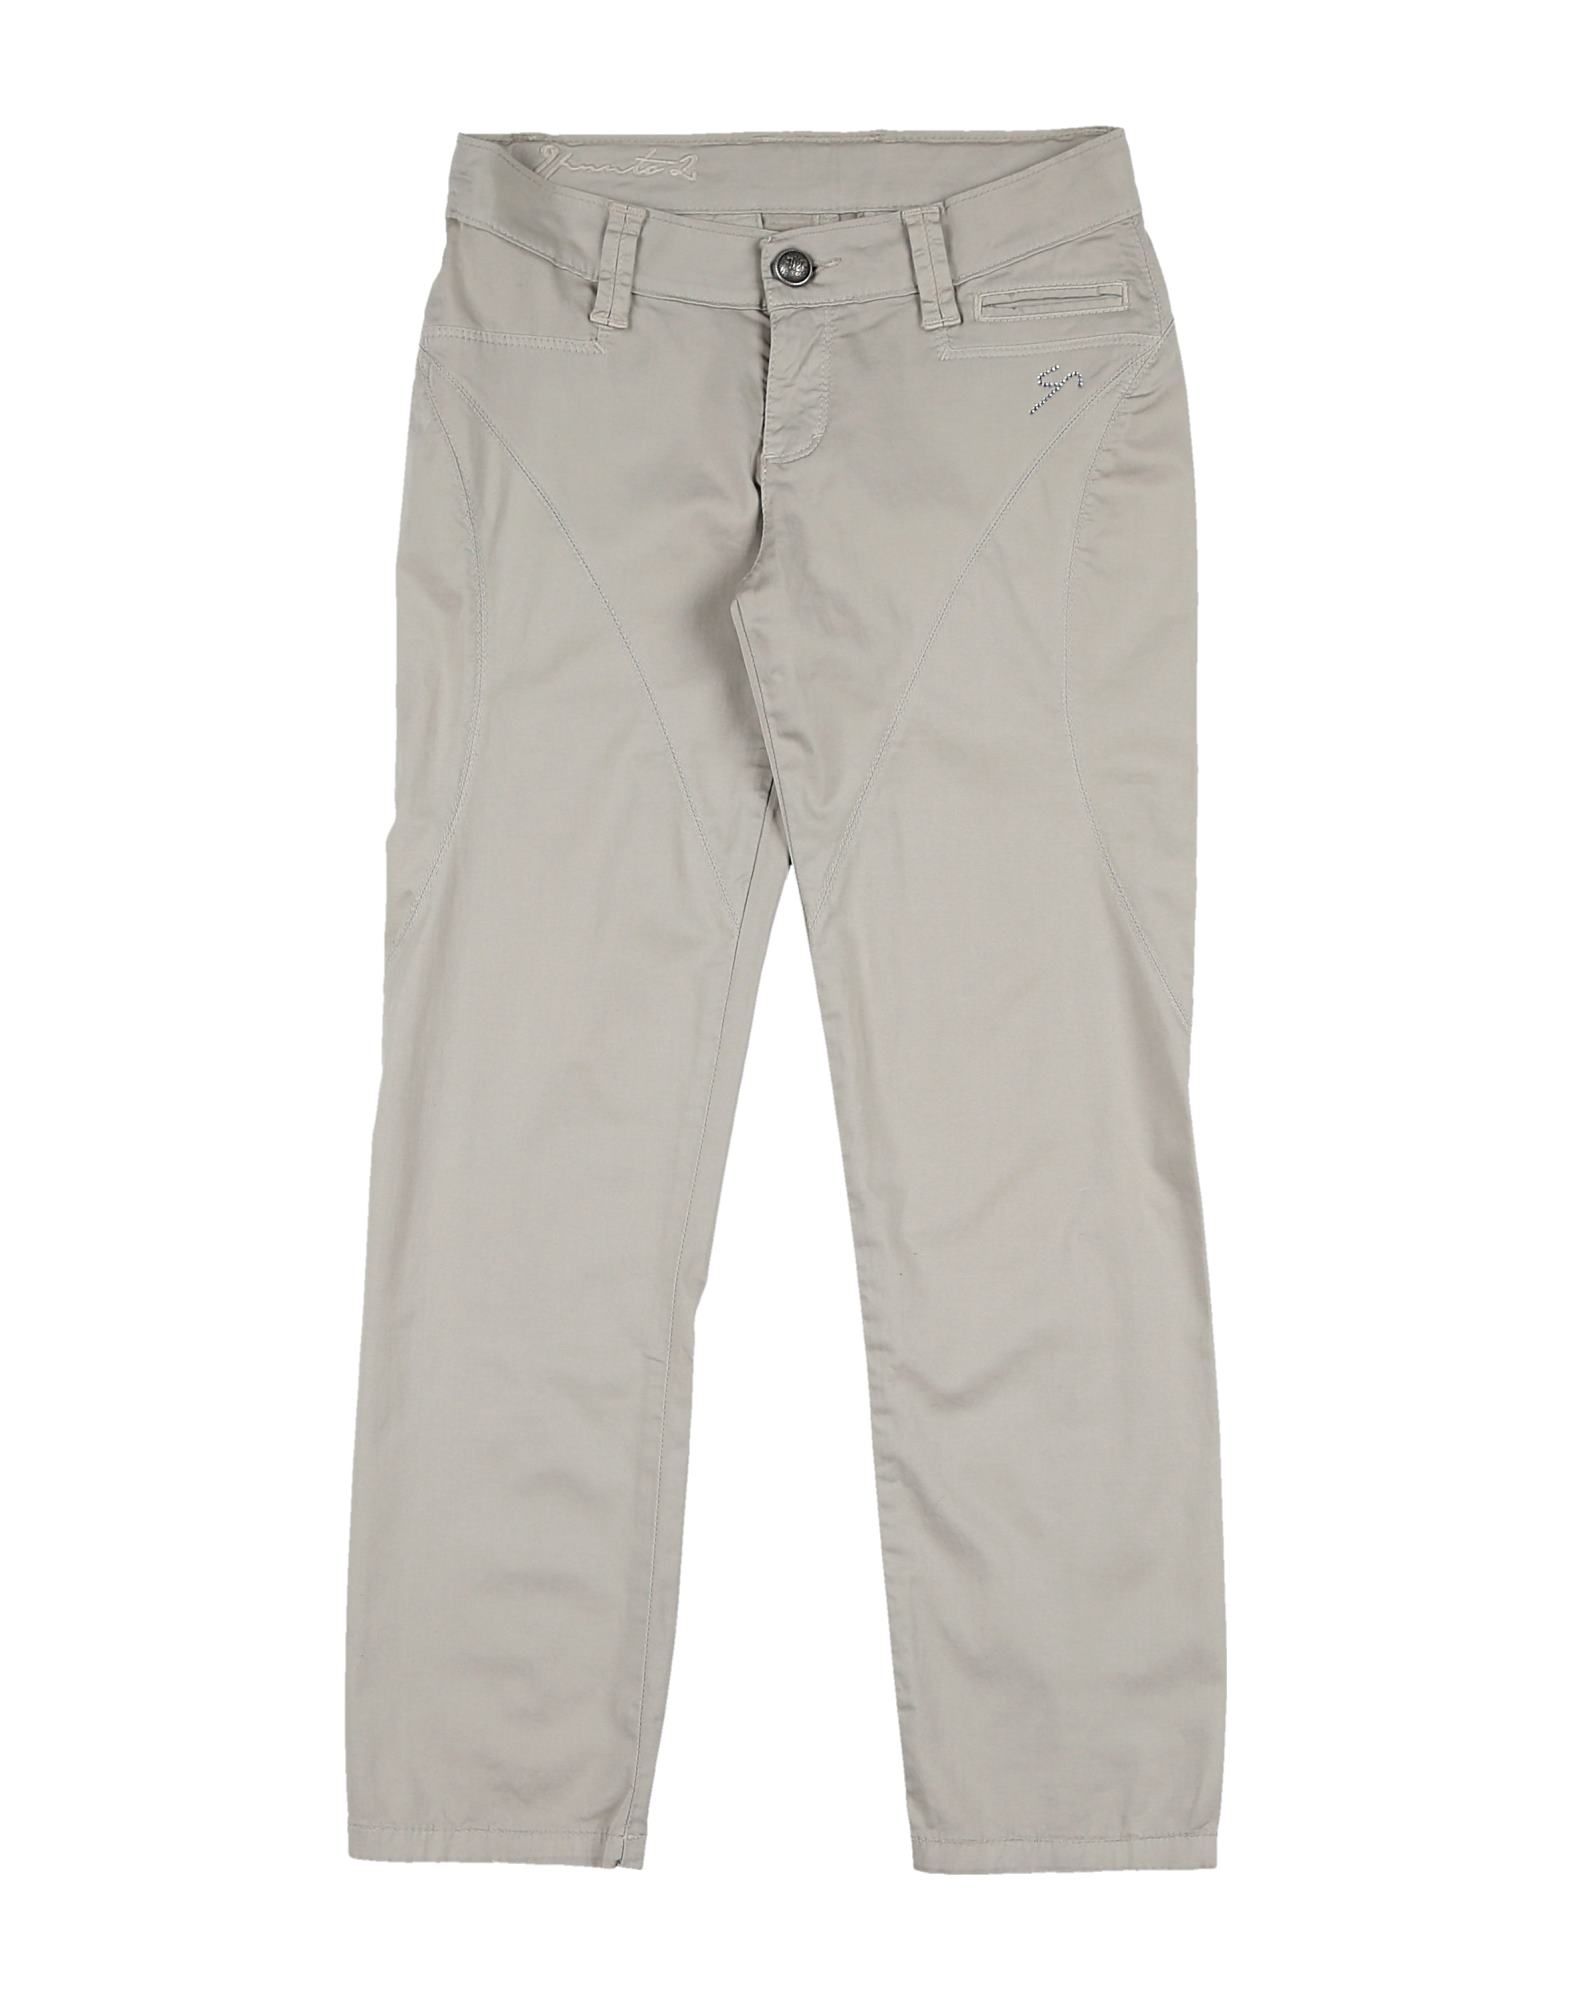 9.2 By Carlo Chionna Kids' Pants In Grey